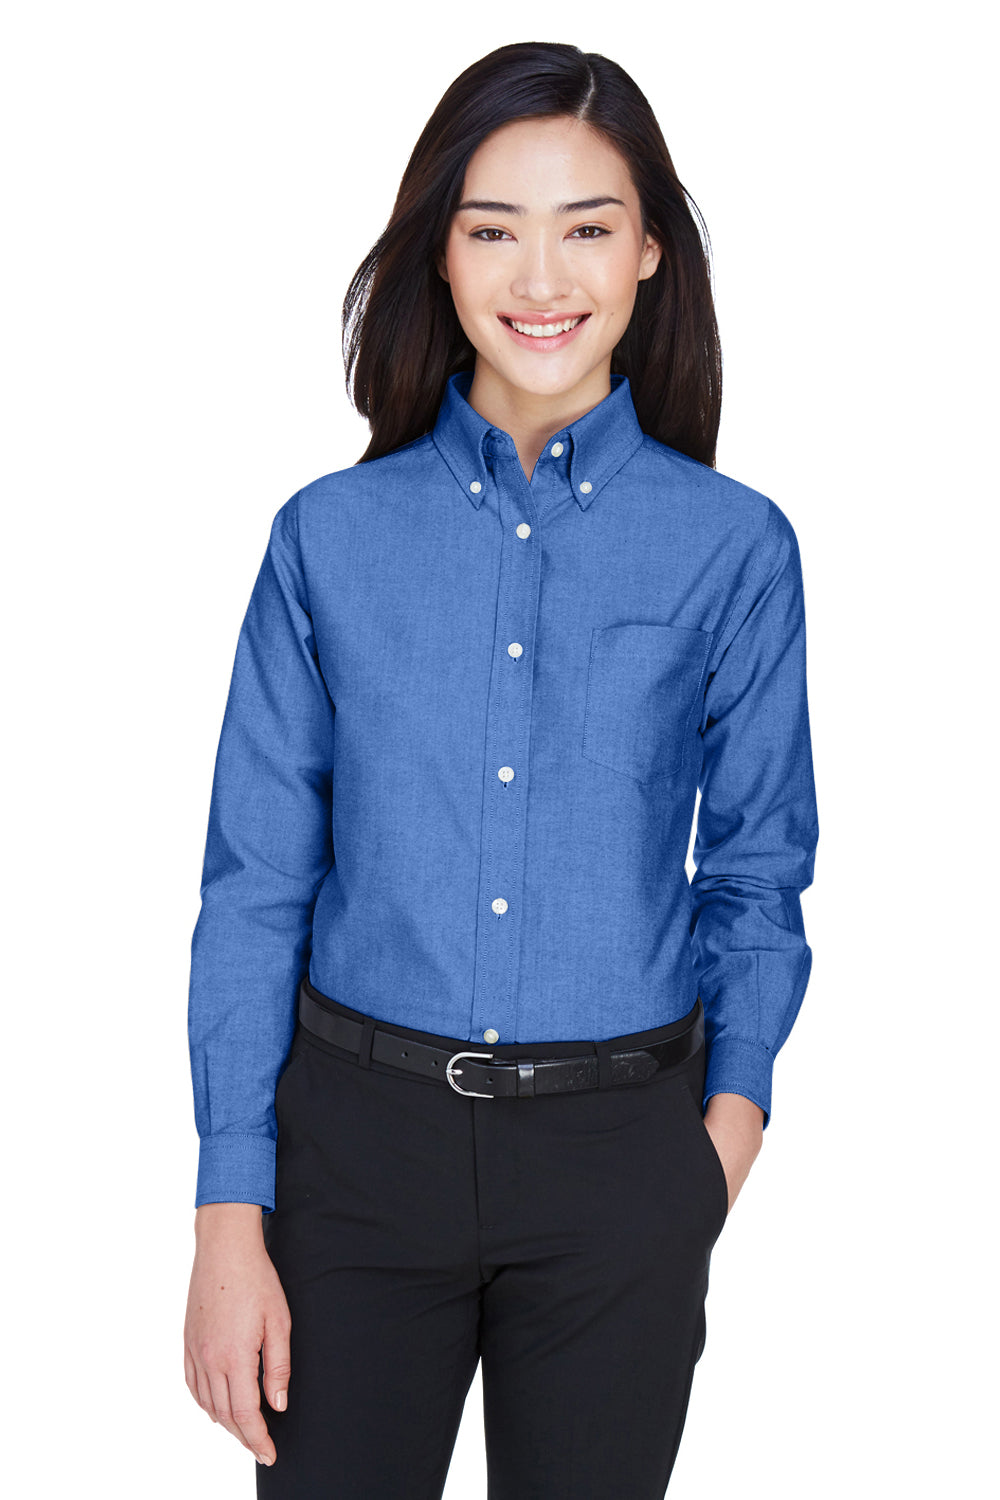 UltraClub 8990 Womens Classic Oxford Wrinkle Resistant Long Sleeve Button Down Shirt w/ Pocket French Blue Front